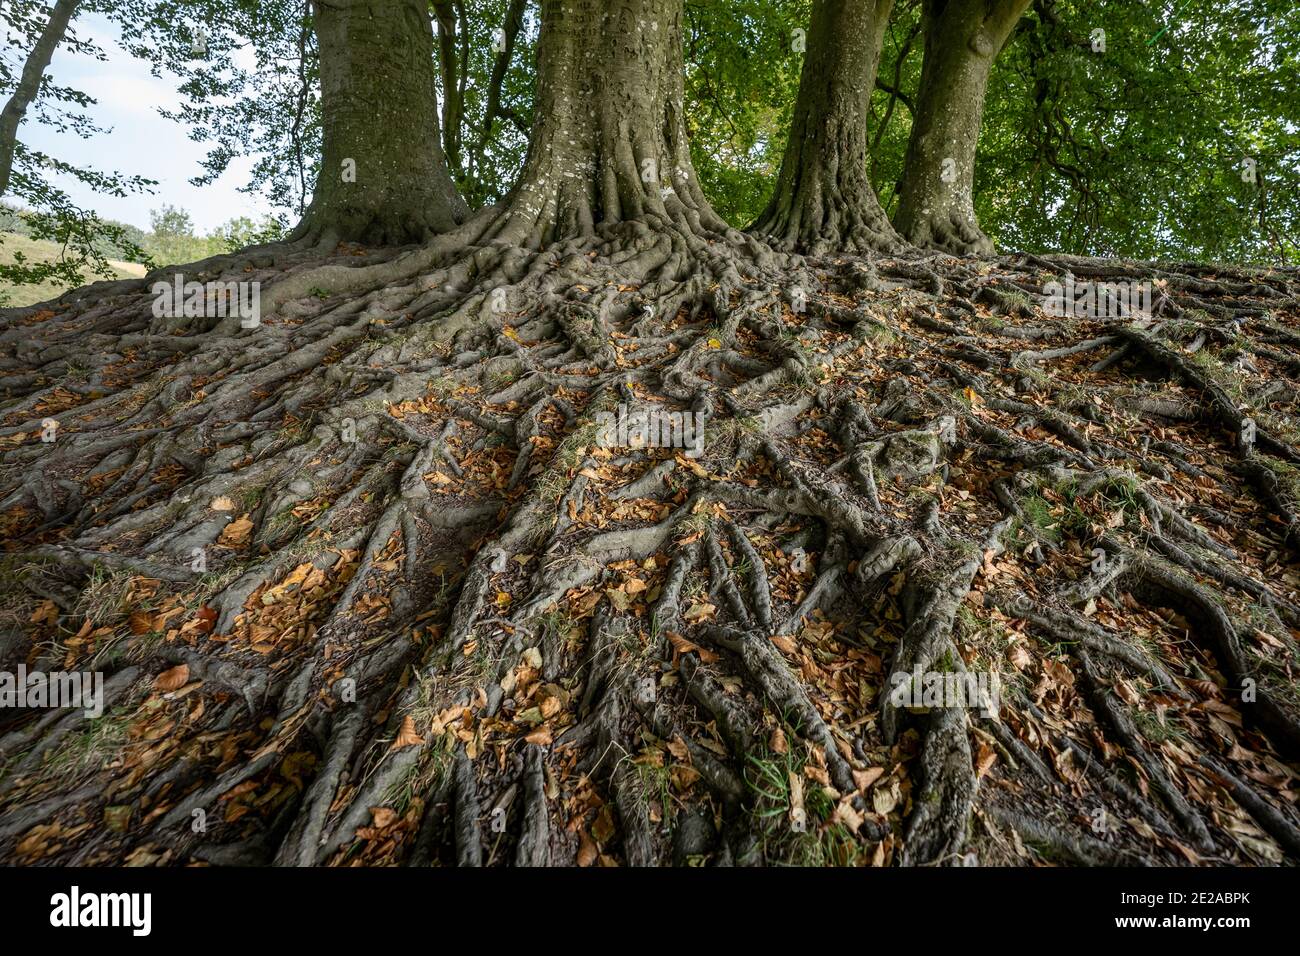 JRR Tolkien's Mythic Trees in Avebury, Wiltshire, UK. Stock Photo